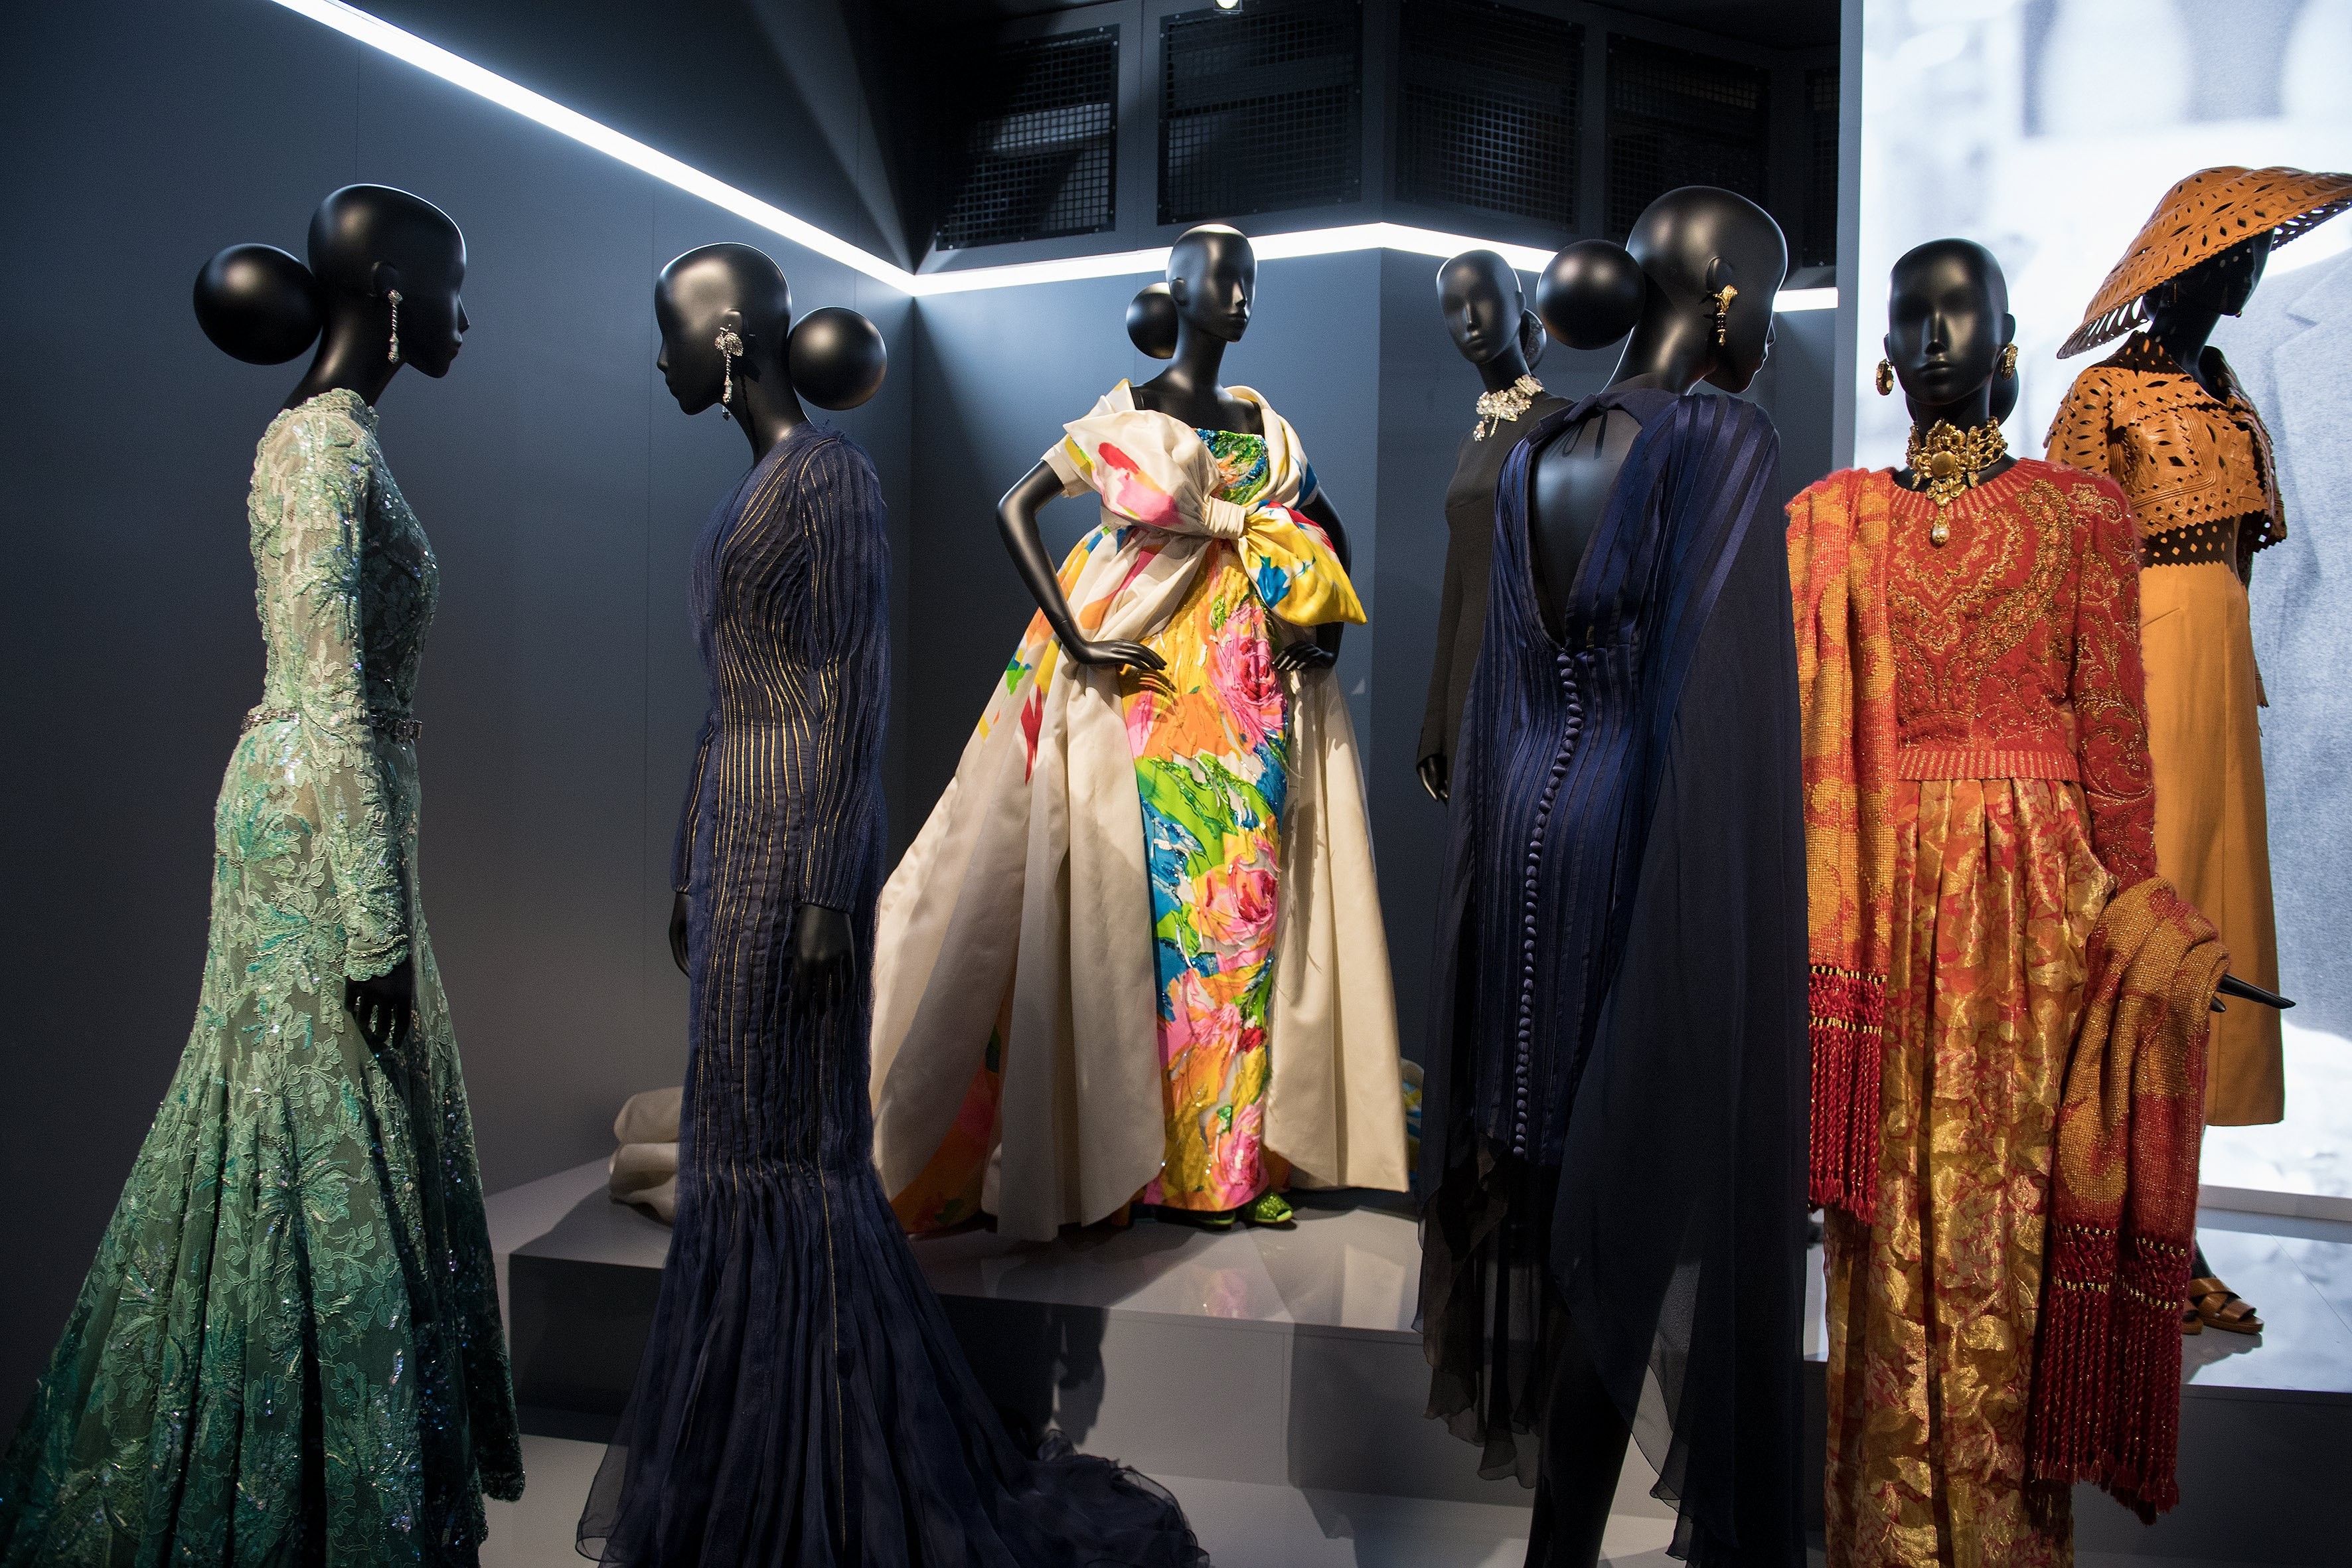 The Musee des Arts Decoratifs presents an exhibition of the work of French designer Christian Dior during the Paris Fashion Week. Photo: EPA